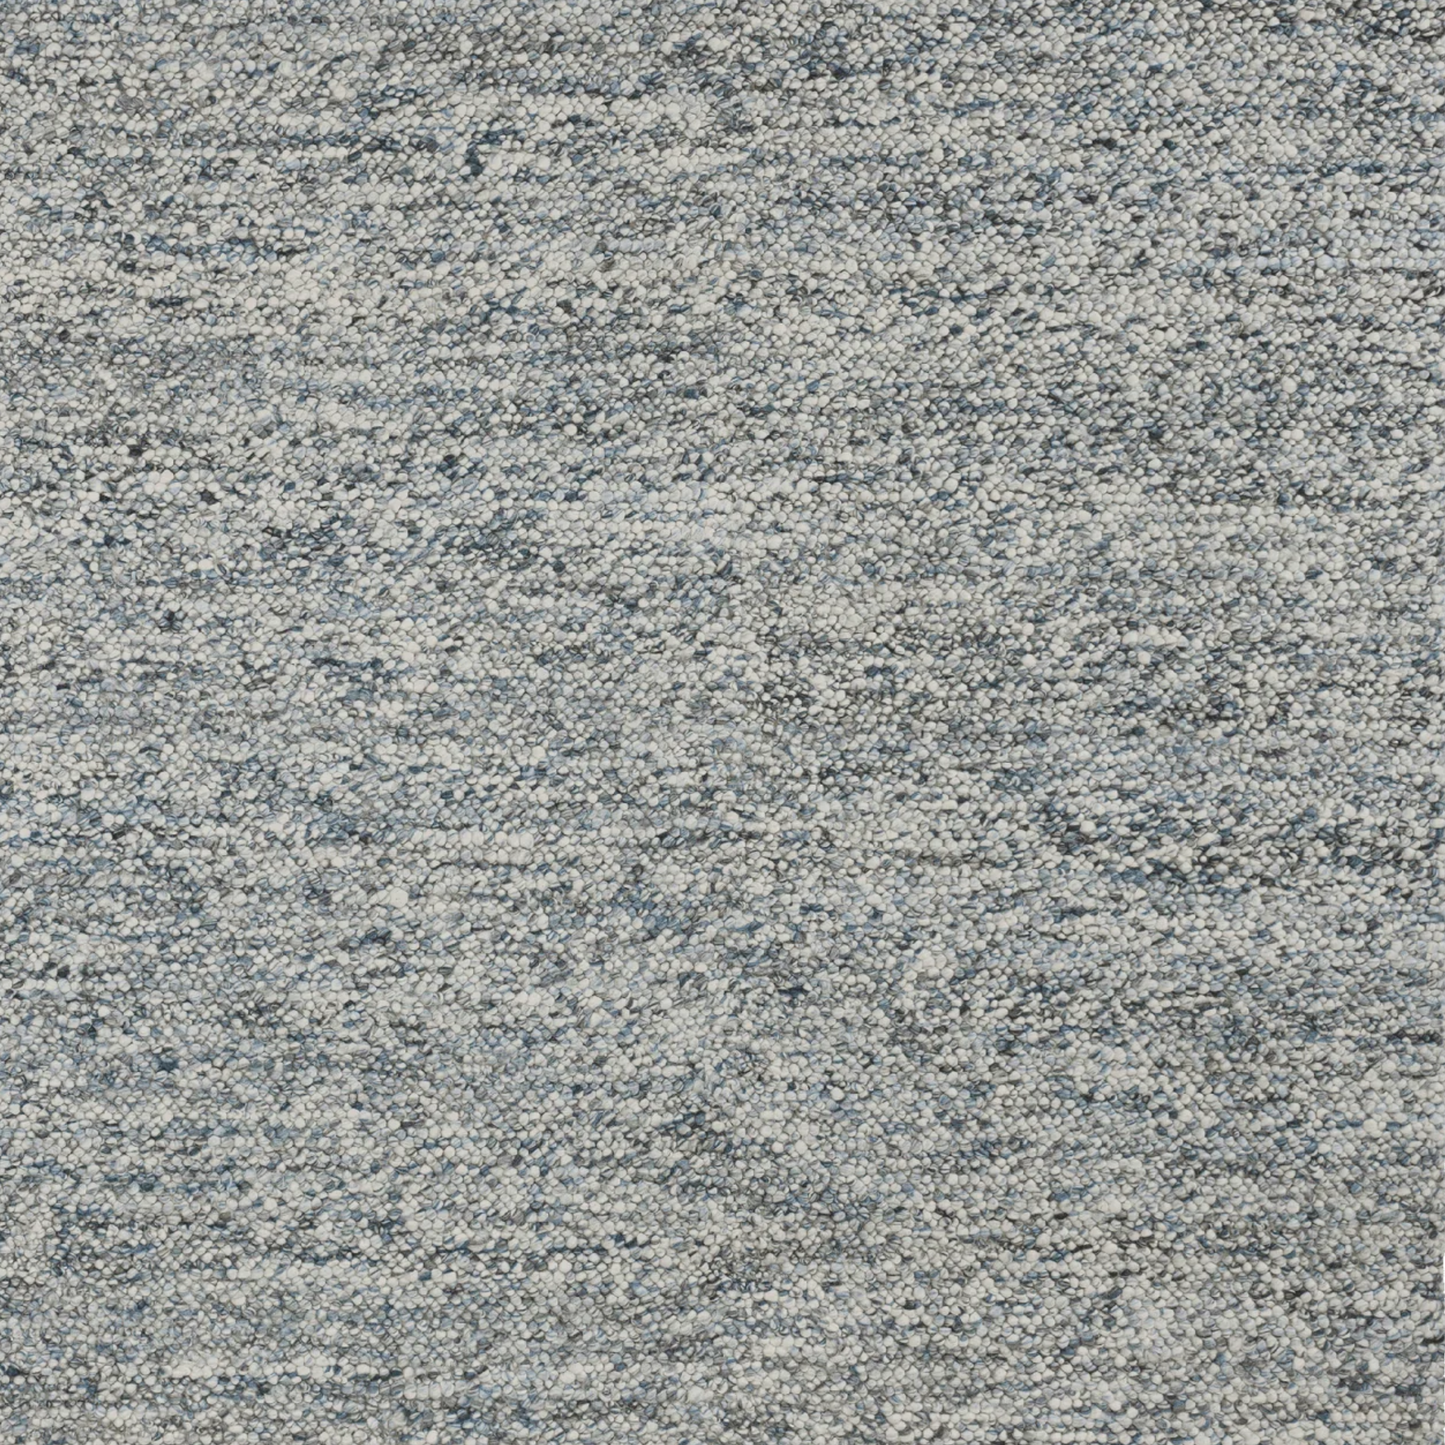 Pearle Rug - Blue Willow 300cm x 400cm